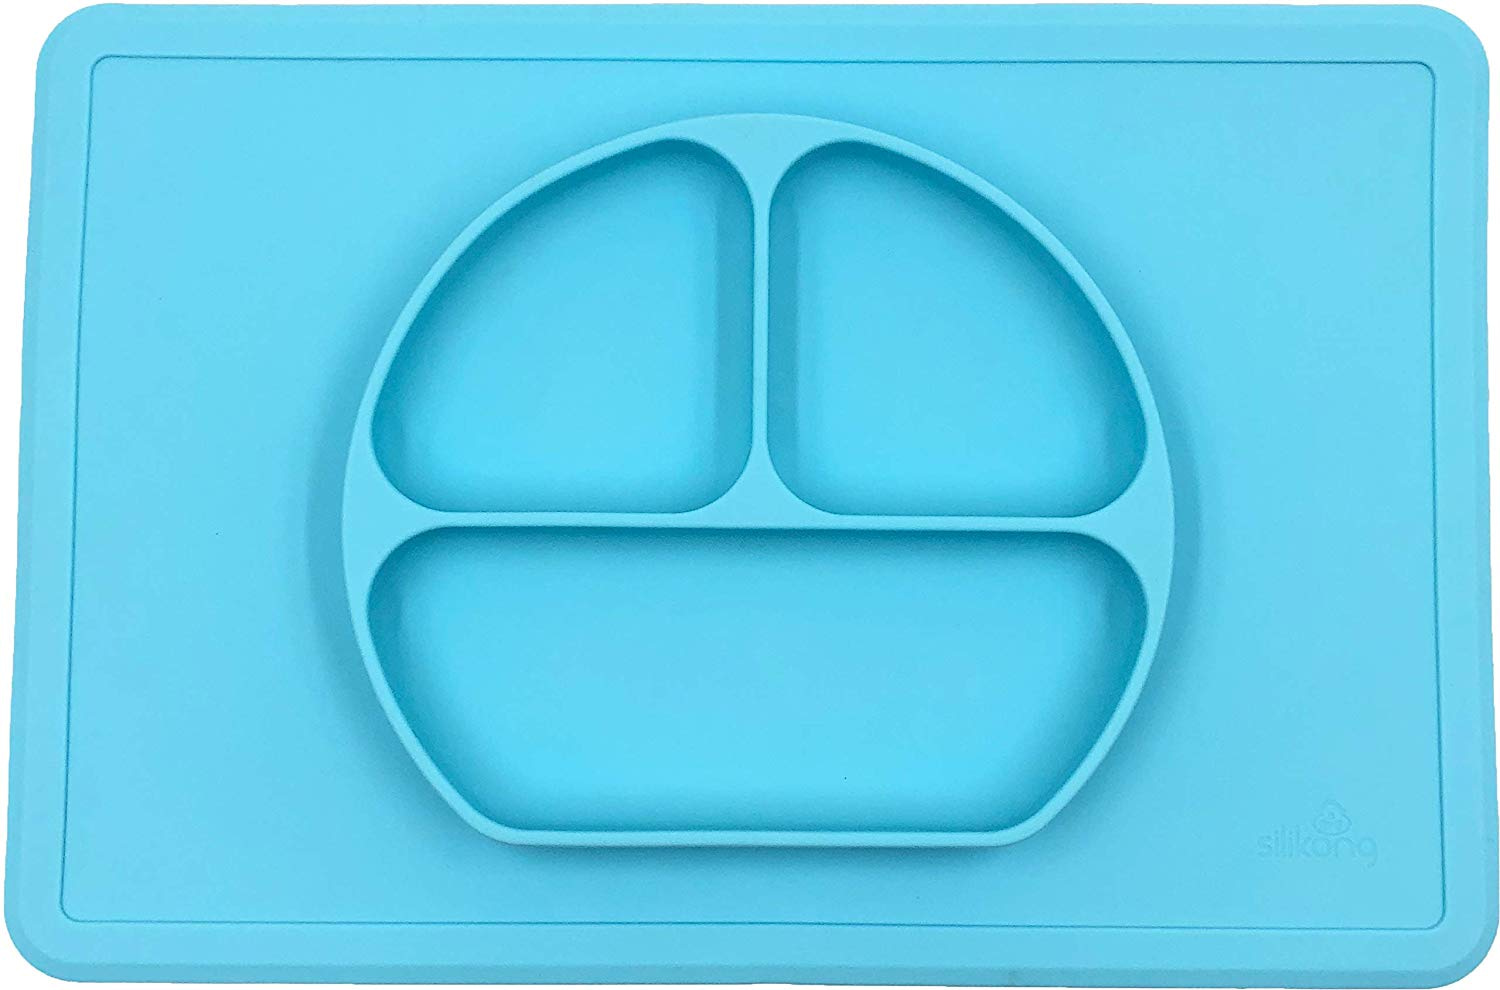 Blue silicone baby plate and placemat in one